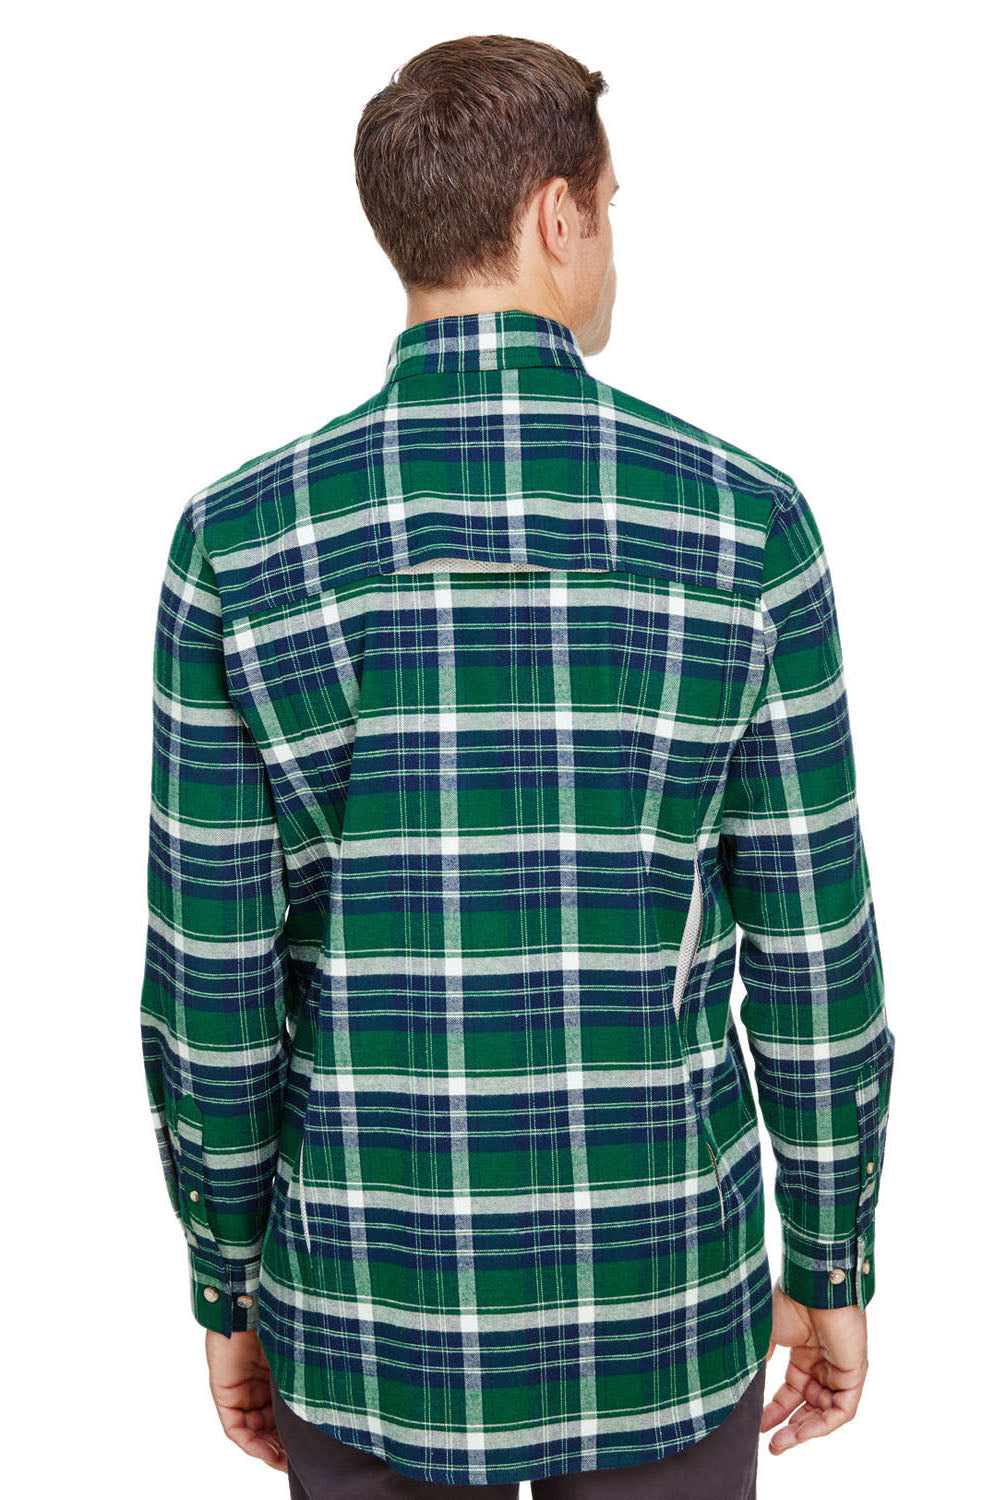 Backpacker BP7091 Mens Stretch Flannel Long Sleeve Button Down Shirt w/ Double Pockets Forest Green Back